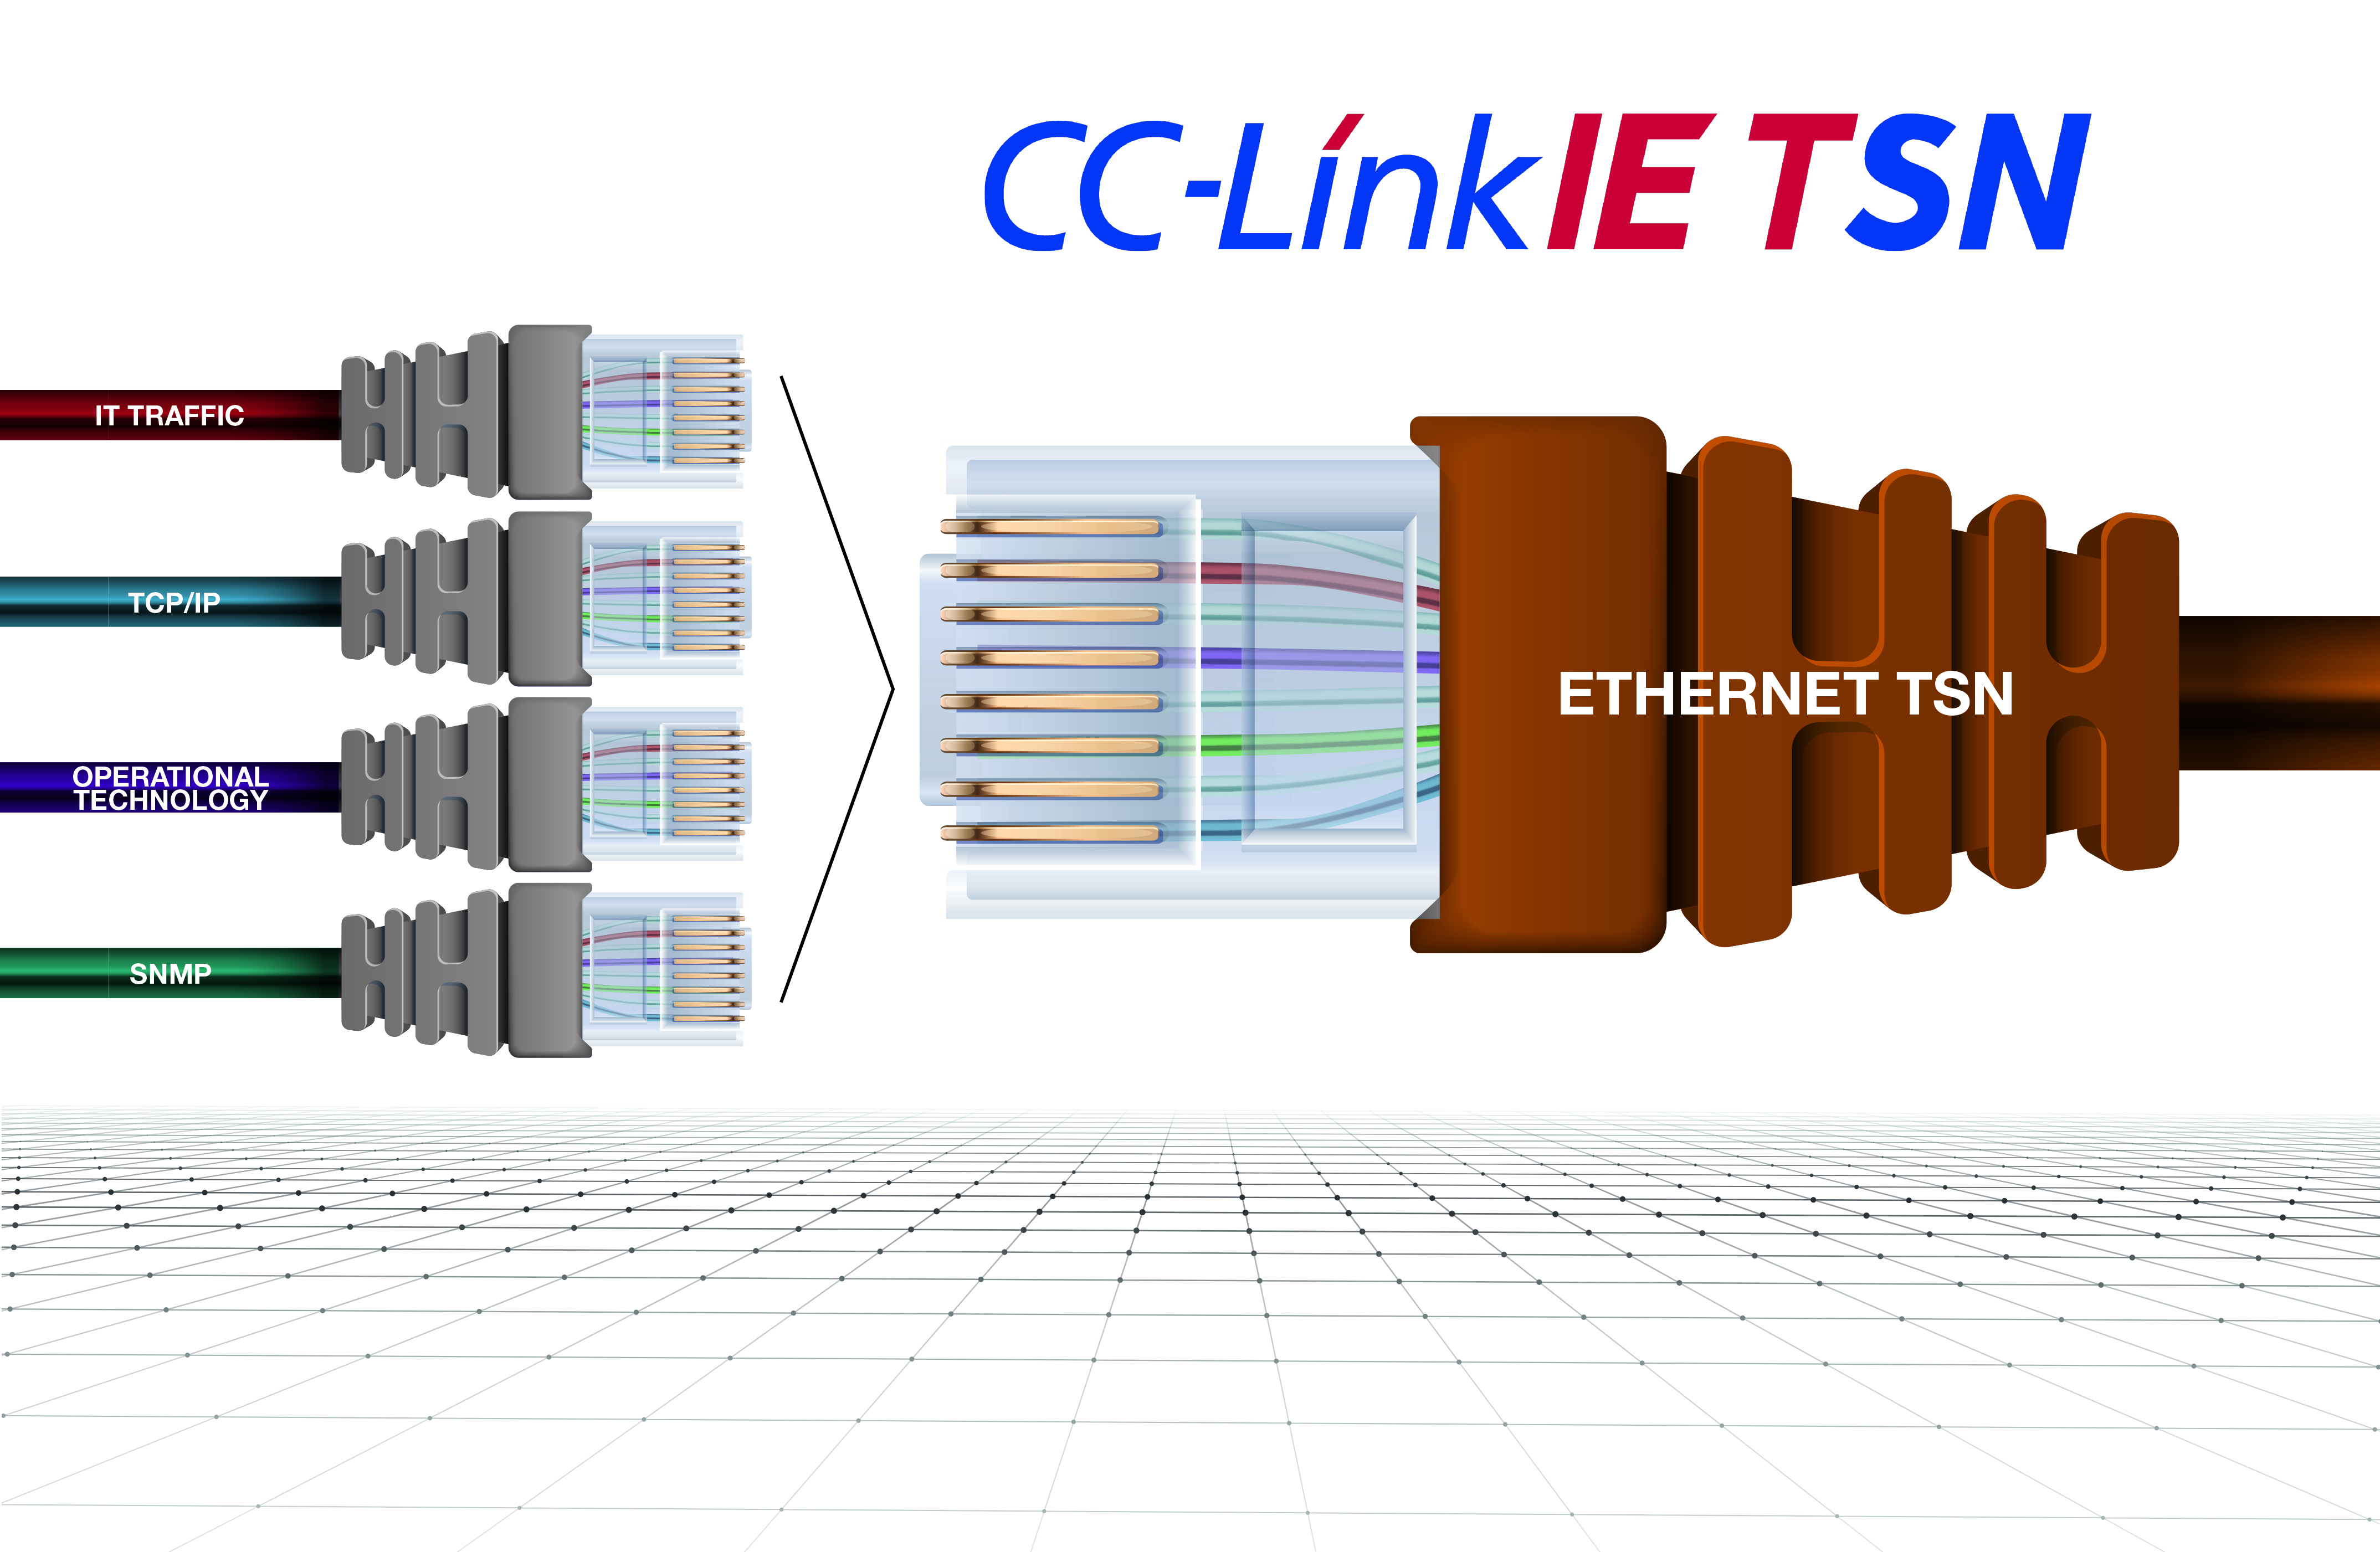 CC-Link IE TSN ensures that the servos can be connected with a multitude of devices from the OT and IT levels. With Simple Network Management Protocol (SNMP), the network technology supports asset monitoring and management from IT applications.